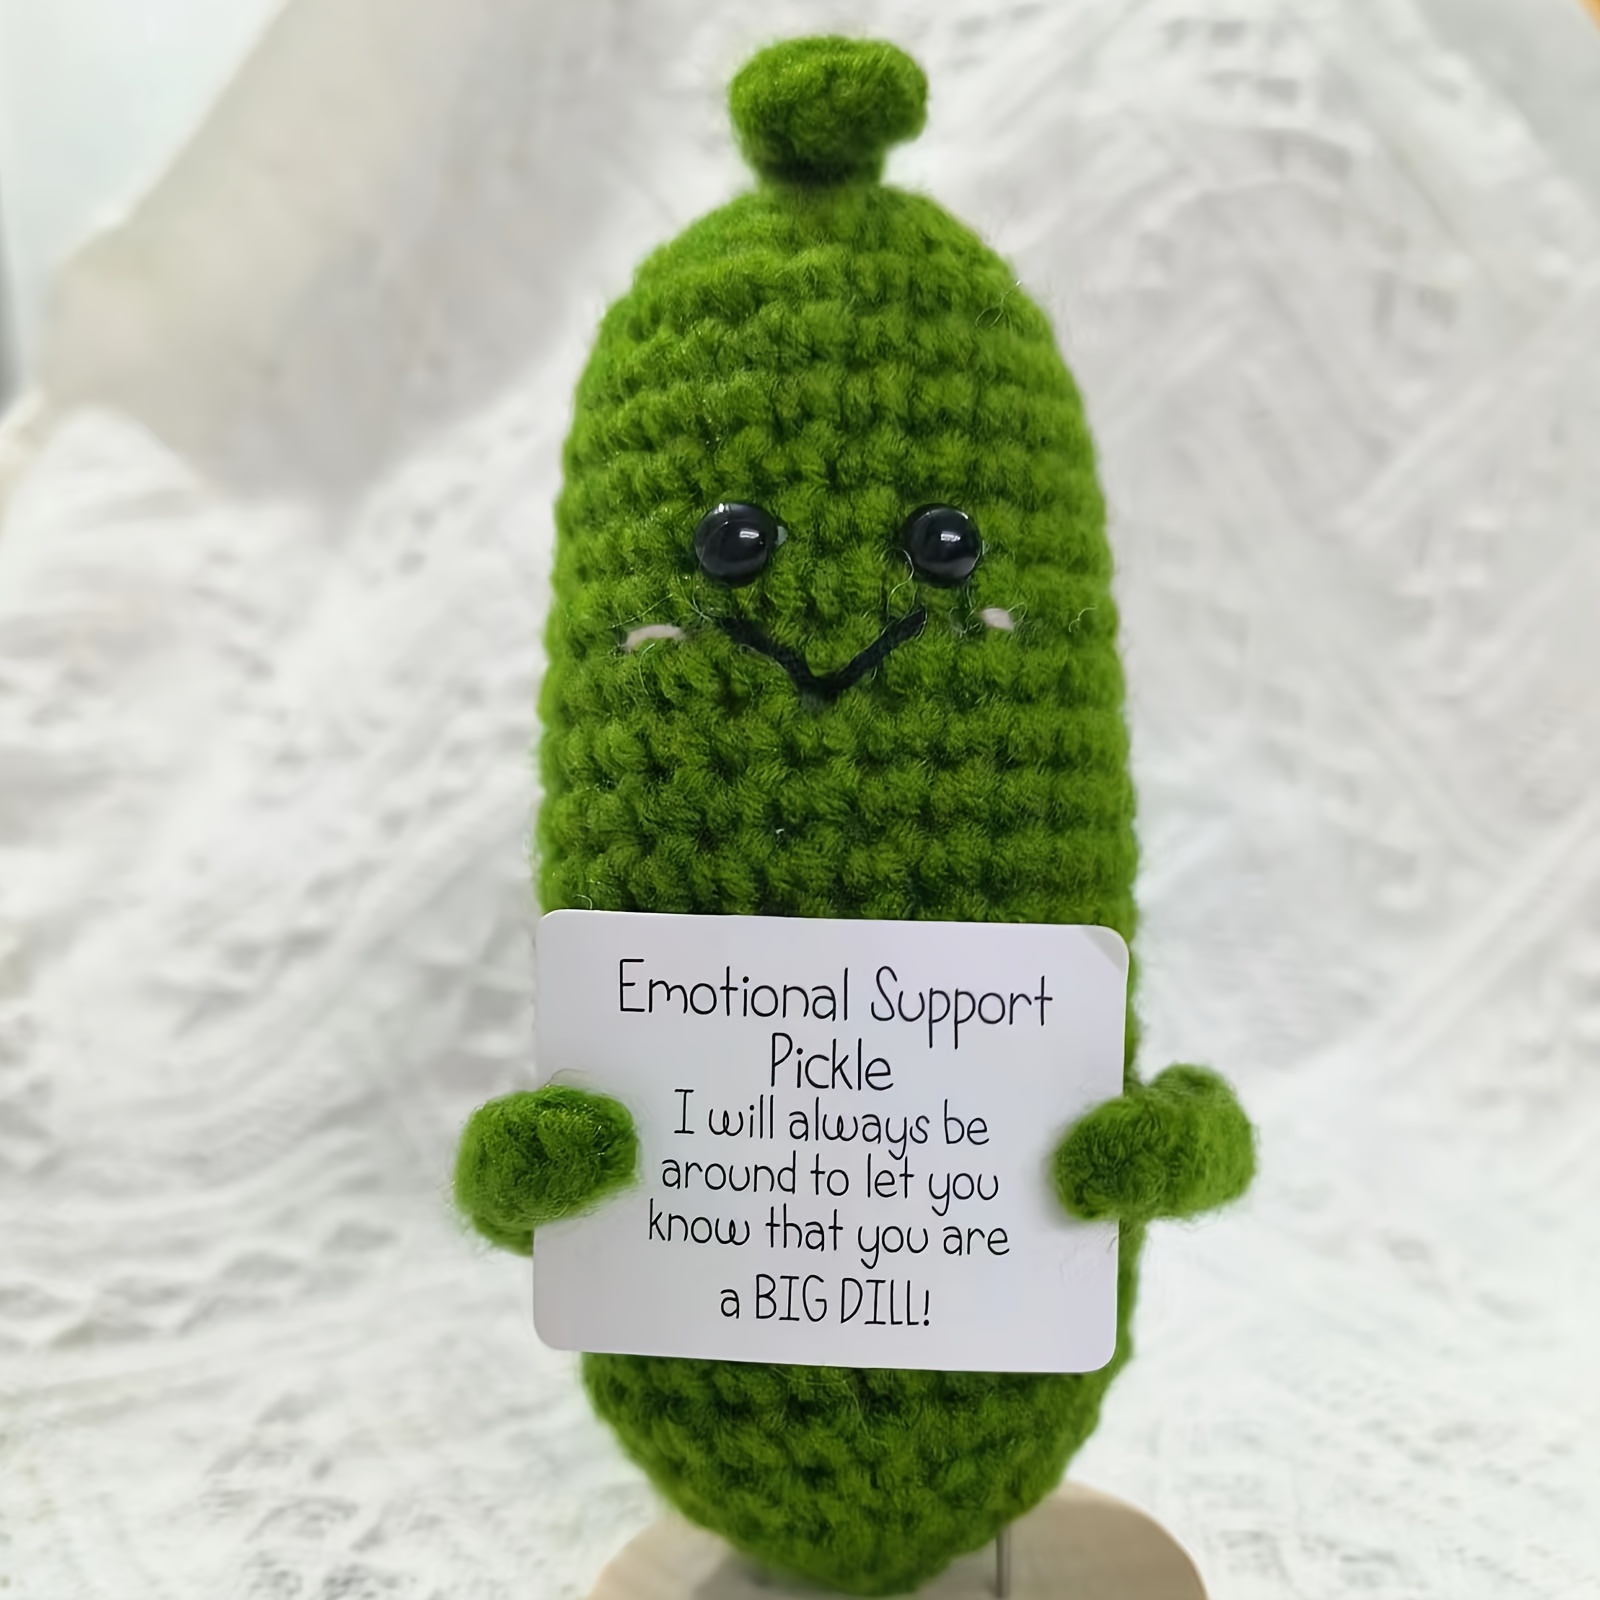 FMNGOP Exclusive Emotional Support Crochet Pickle Gift - Handmade Christmas  Ornament with Wooden Base - Cute Knitted Cucumber Doll - Unique